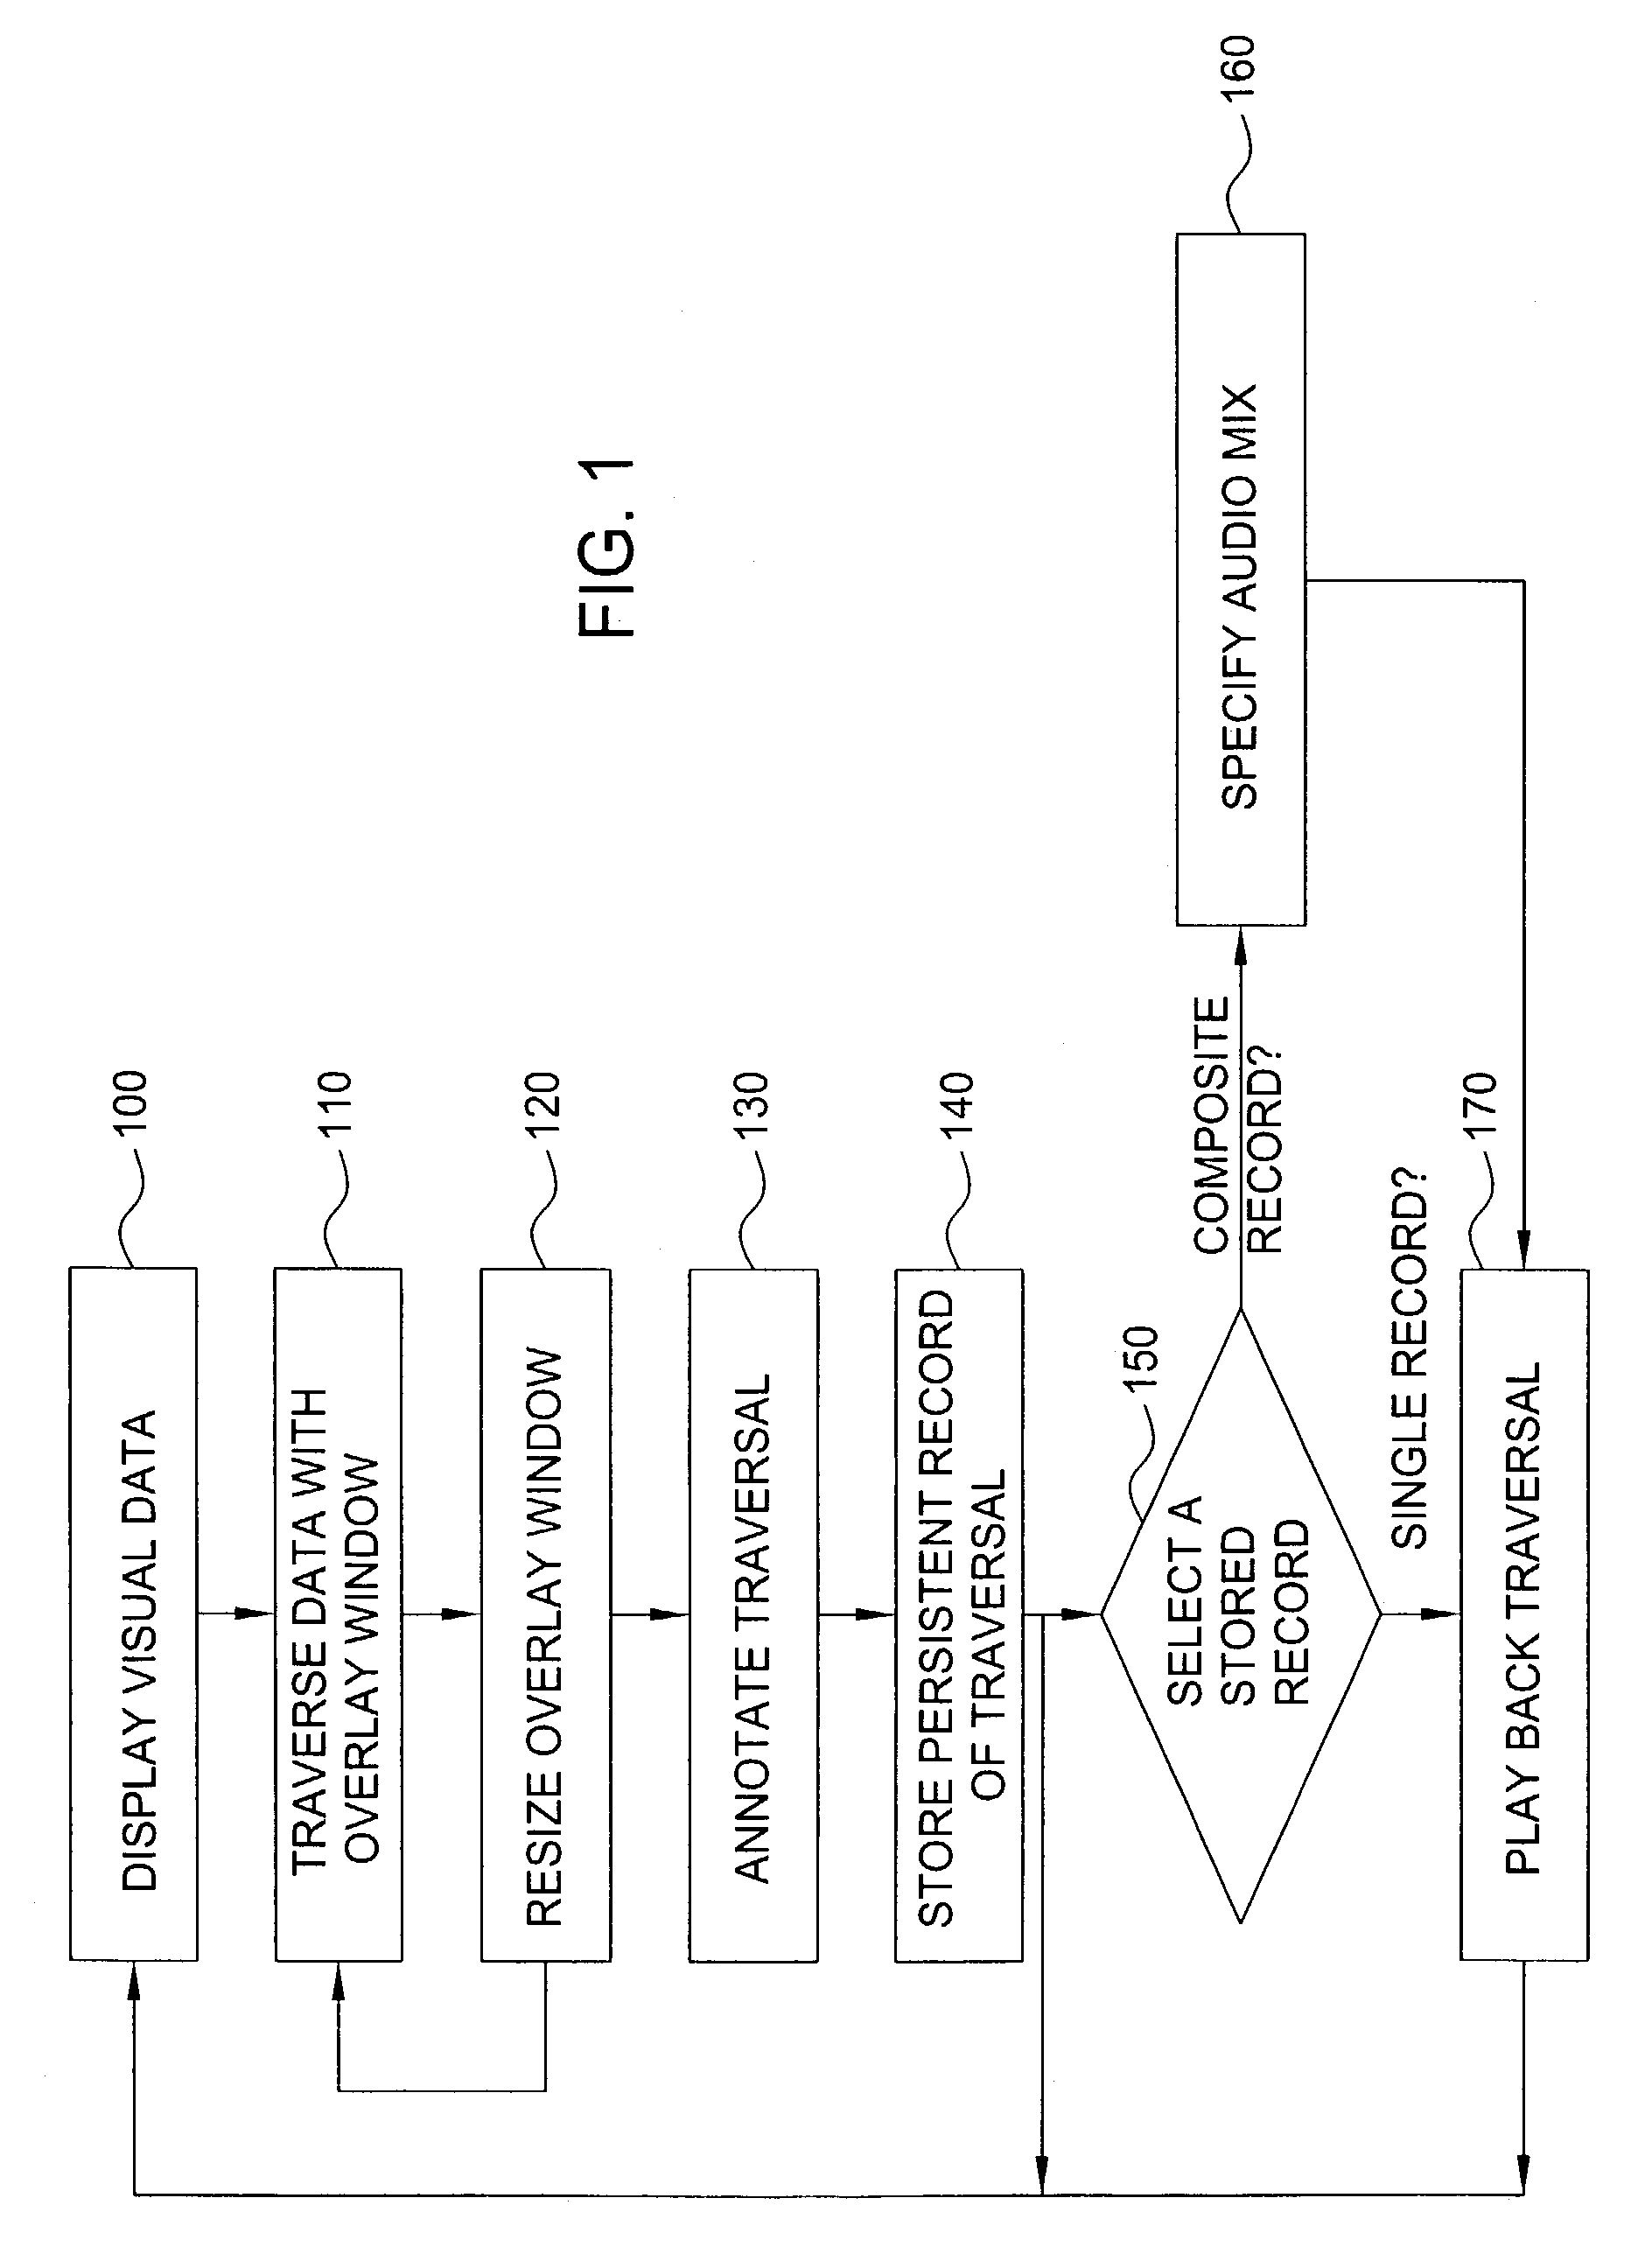 Methods and apparatus for interactive map-based analysis of digital video content